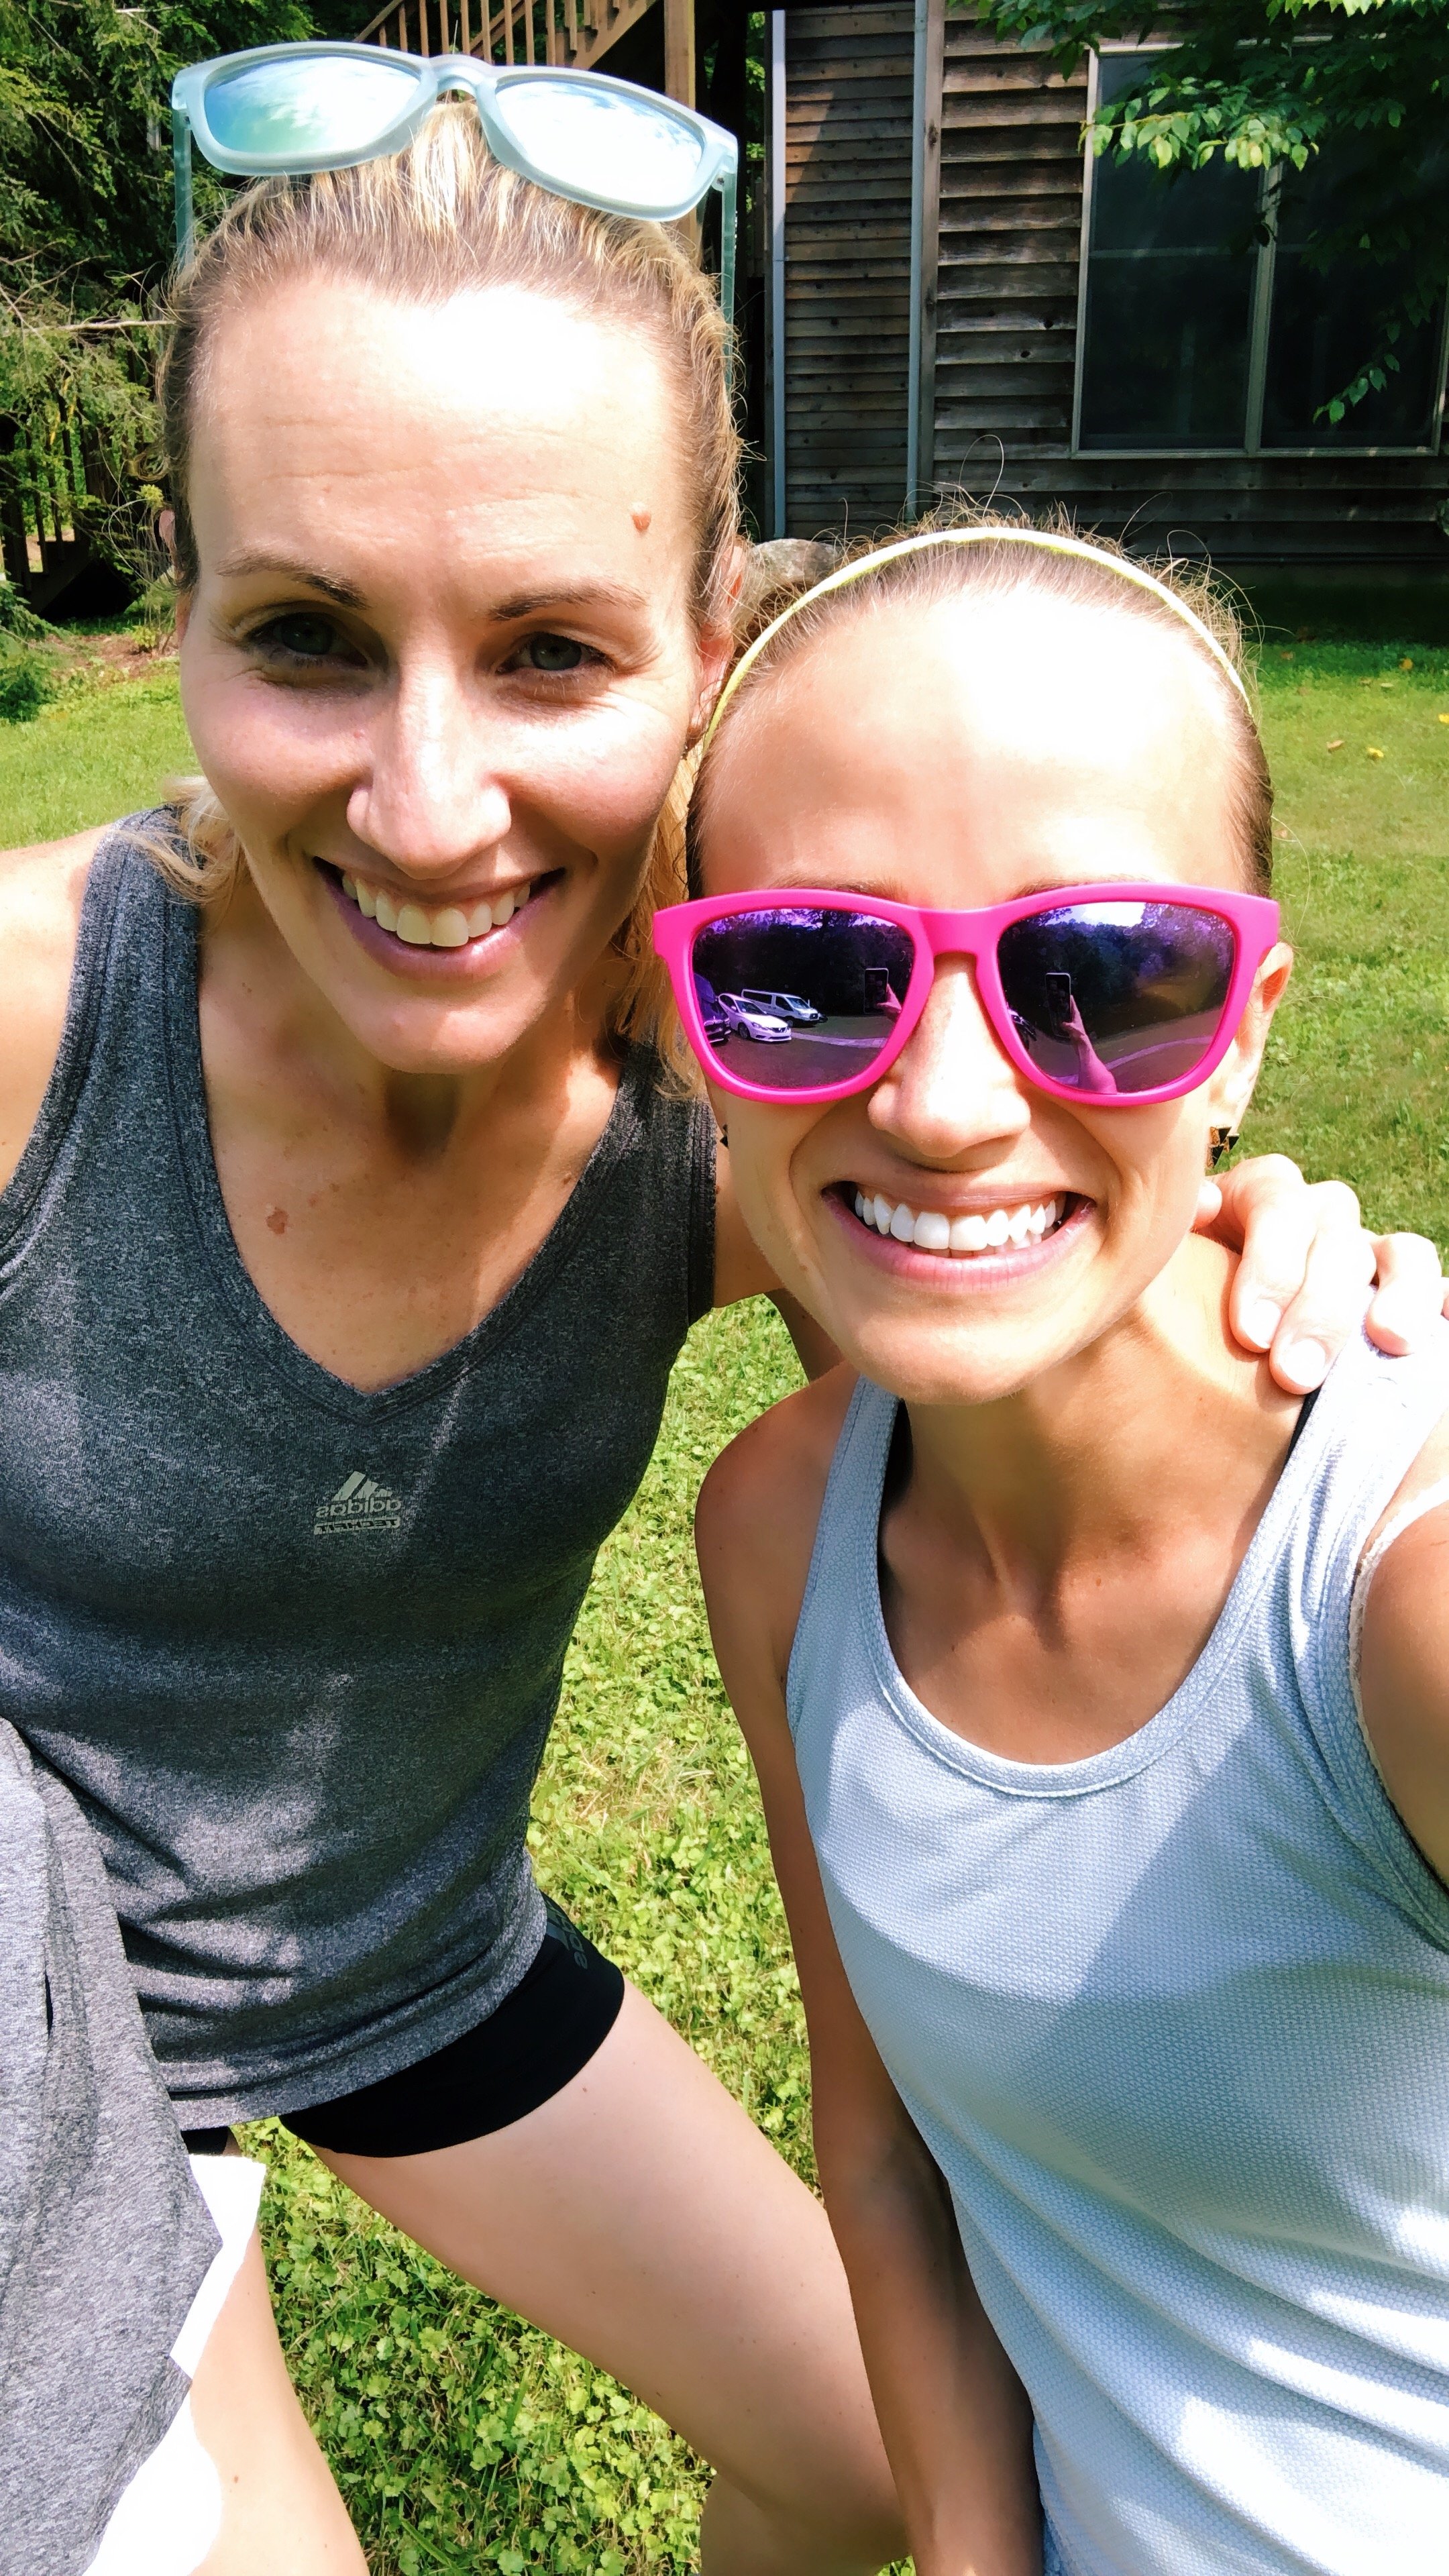 Carrie Tollefson at Zap running camp